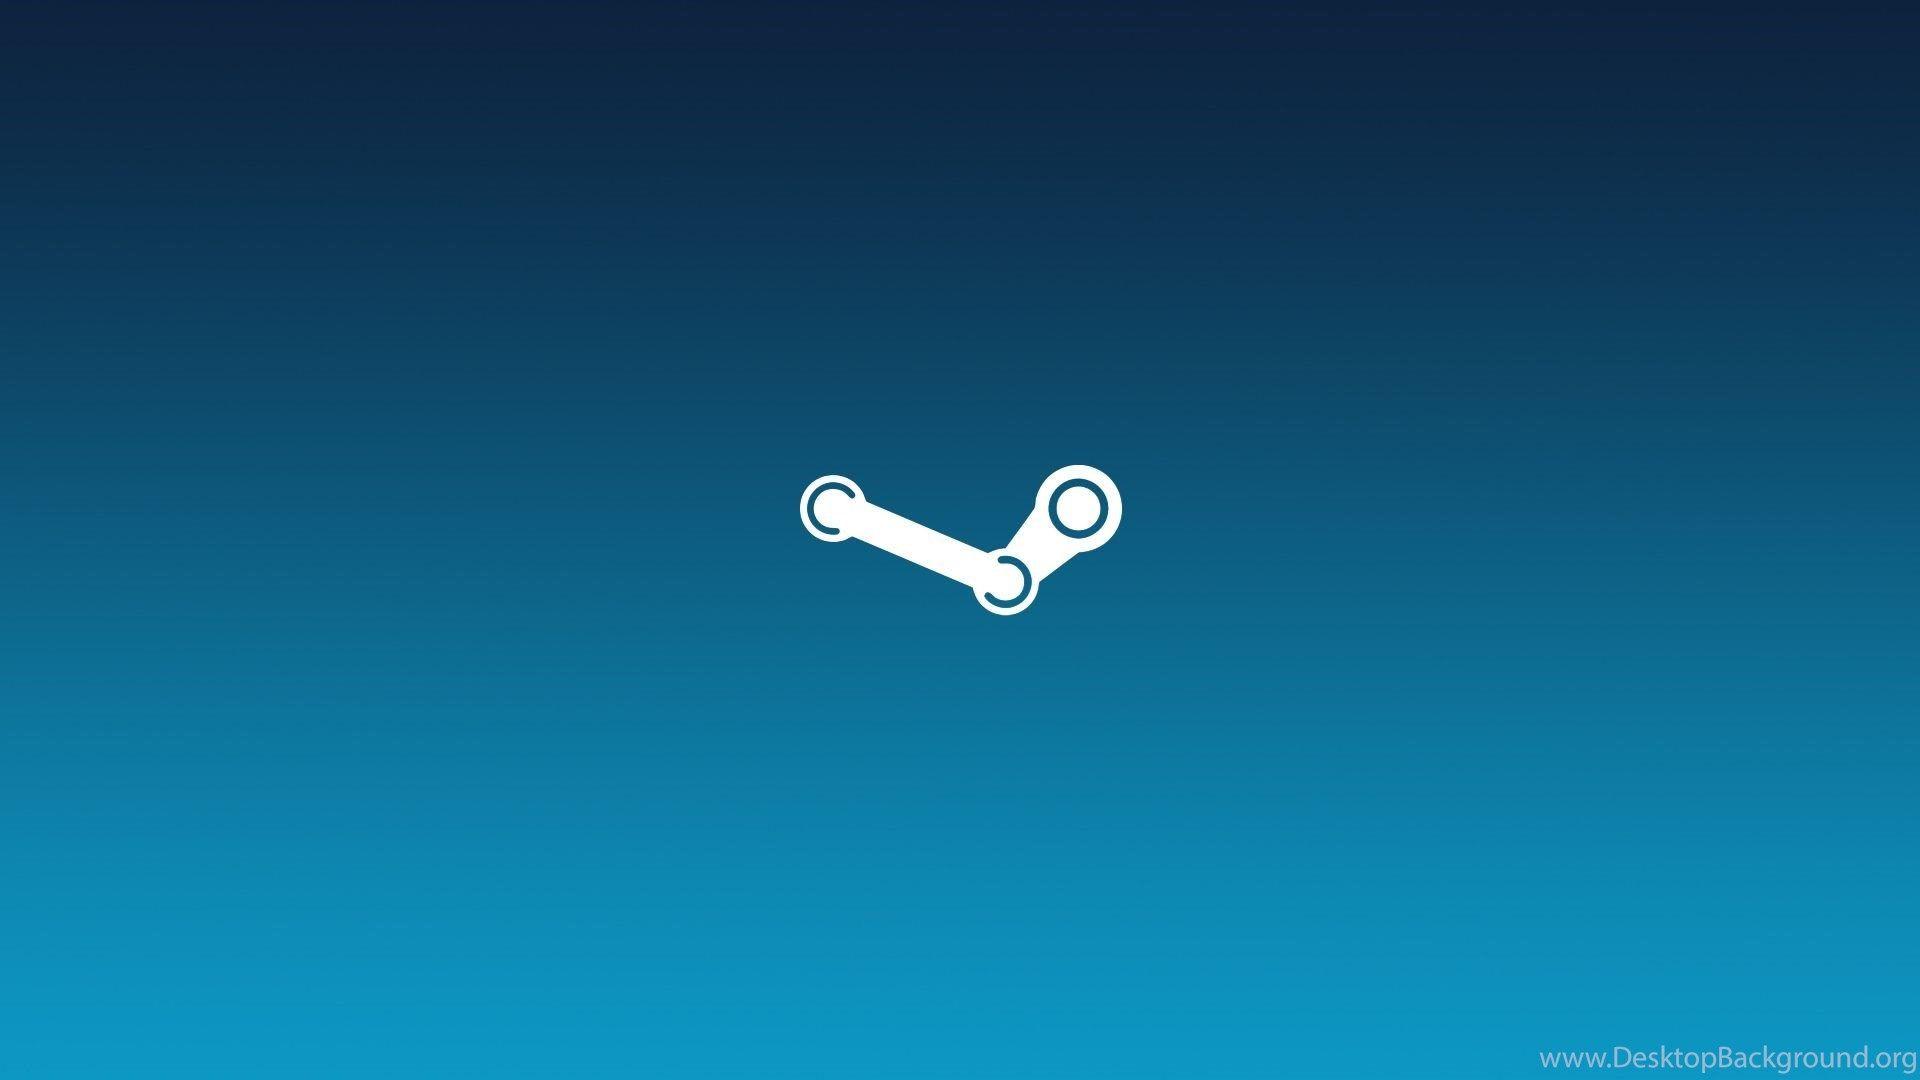 Updated The Steam Wallpaper From My Simplistic Wallpaper Set Imgur